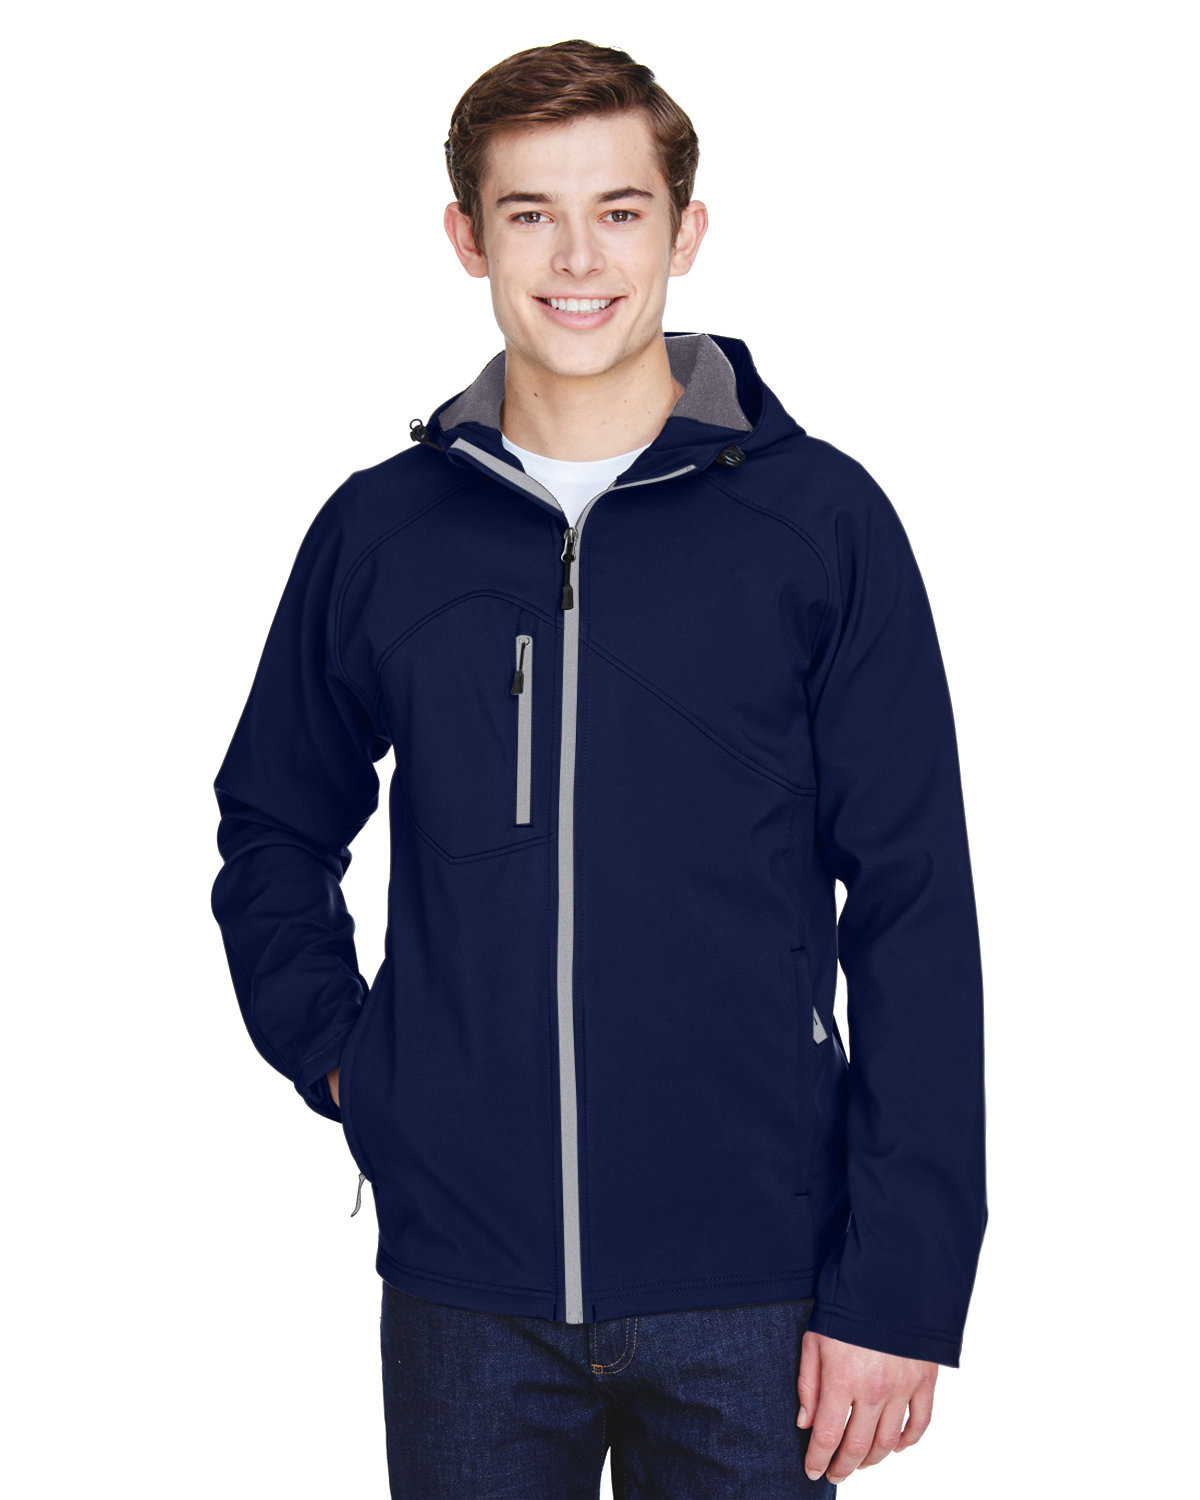 North End Men's Prospect Two-Layer Fleece Bonded Soft Shell Hooded Jacket CLASSIC NAVY 